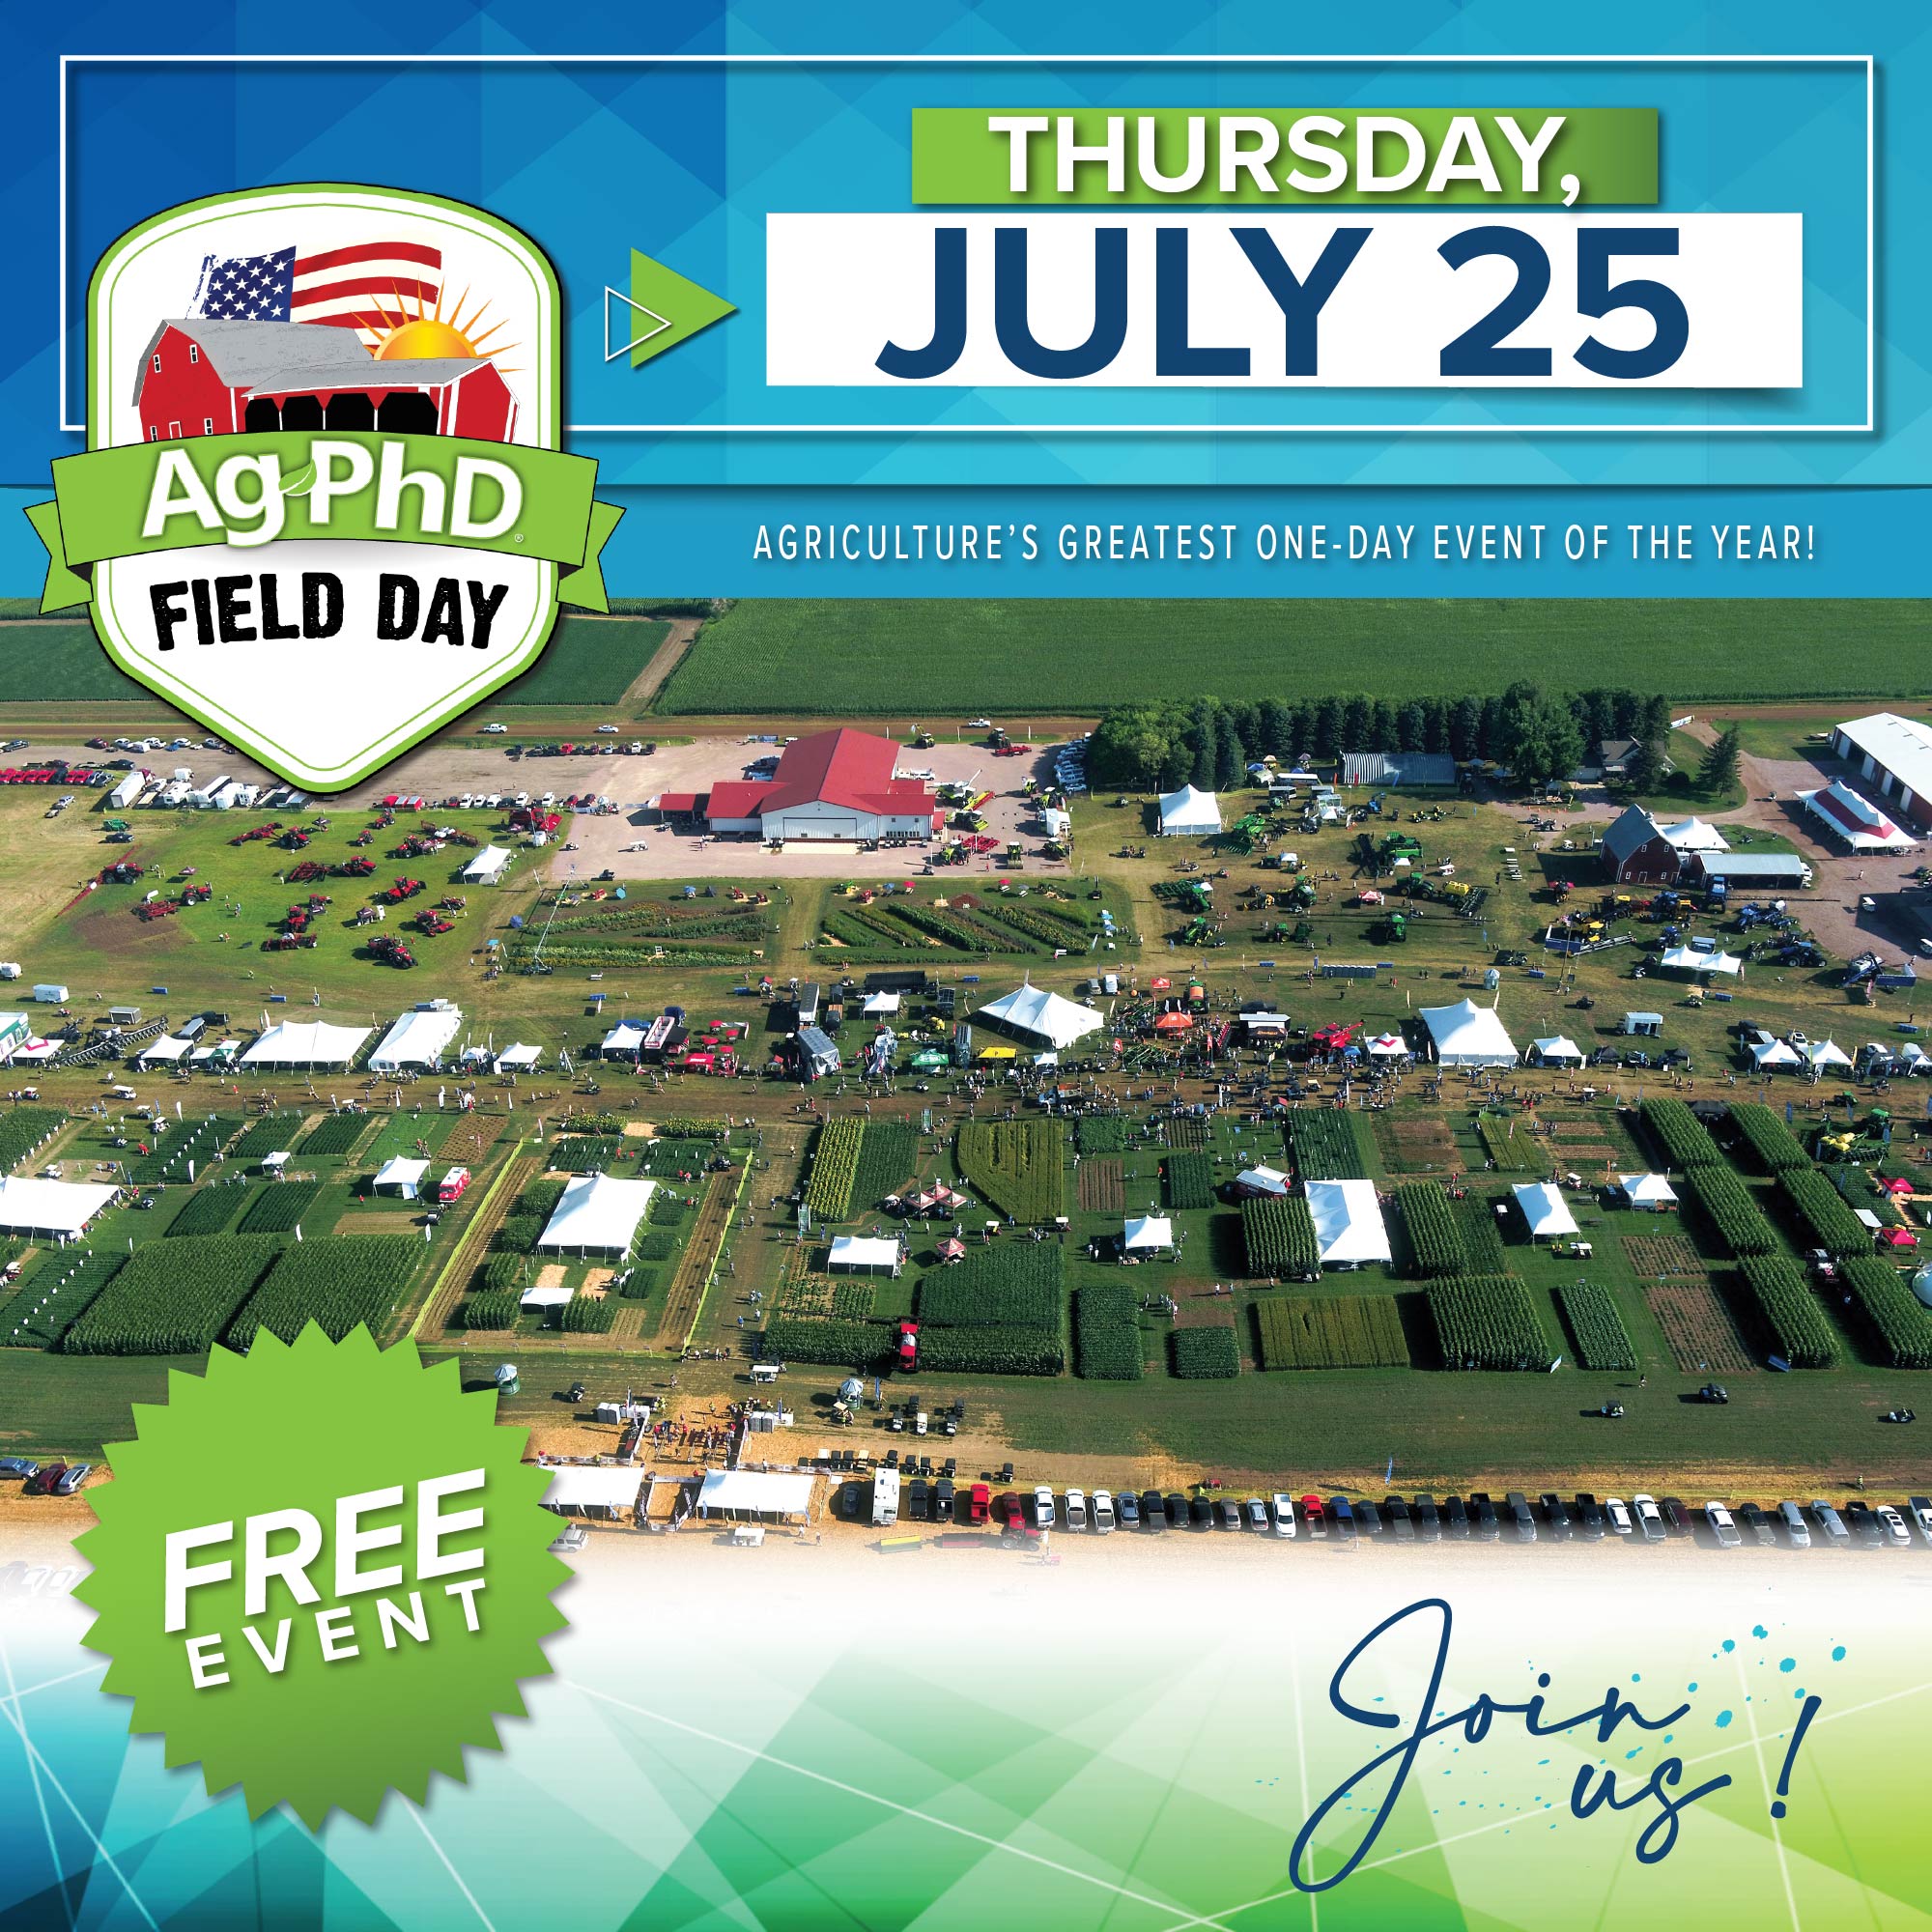 Agriculture's Greatest One-Day Event of the Year! Ag PhD Field Field Day